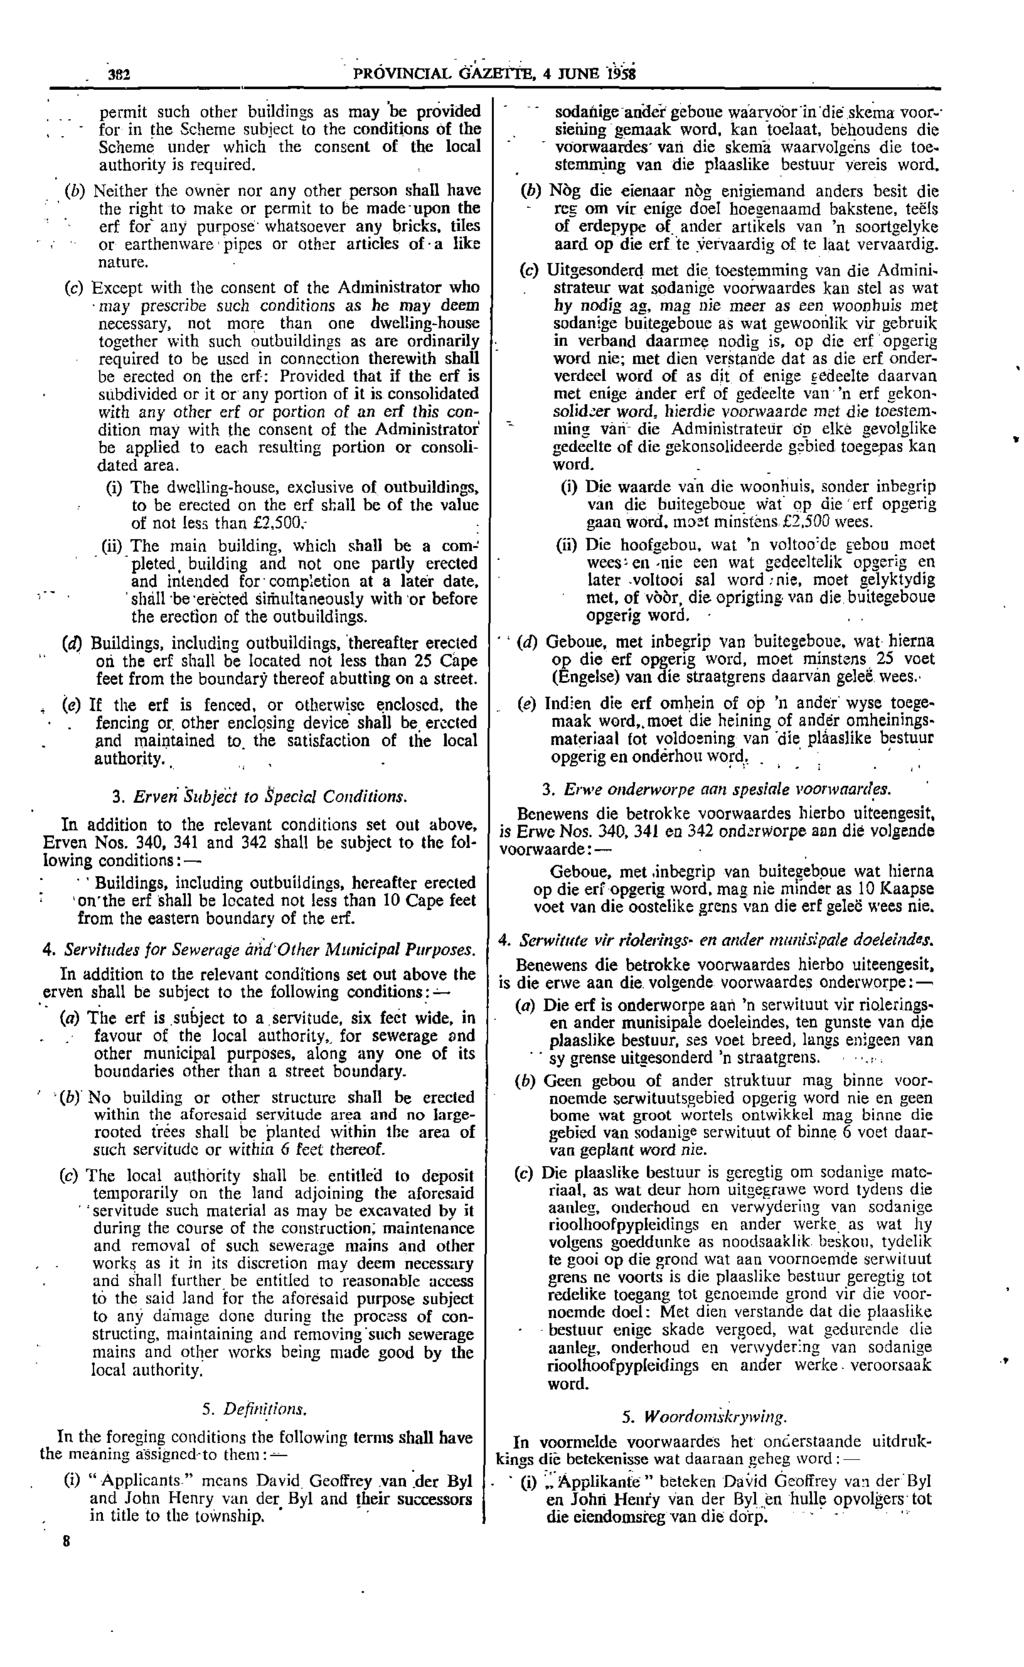 pipes 382 PROVINCIAL GAZETTE 4 JUNE 1058 permit such other buildings as may be provided sodatiige aider geboue waarvobrindie skema voor for in the Scheme subject to the conditions of the sidling